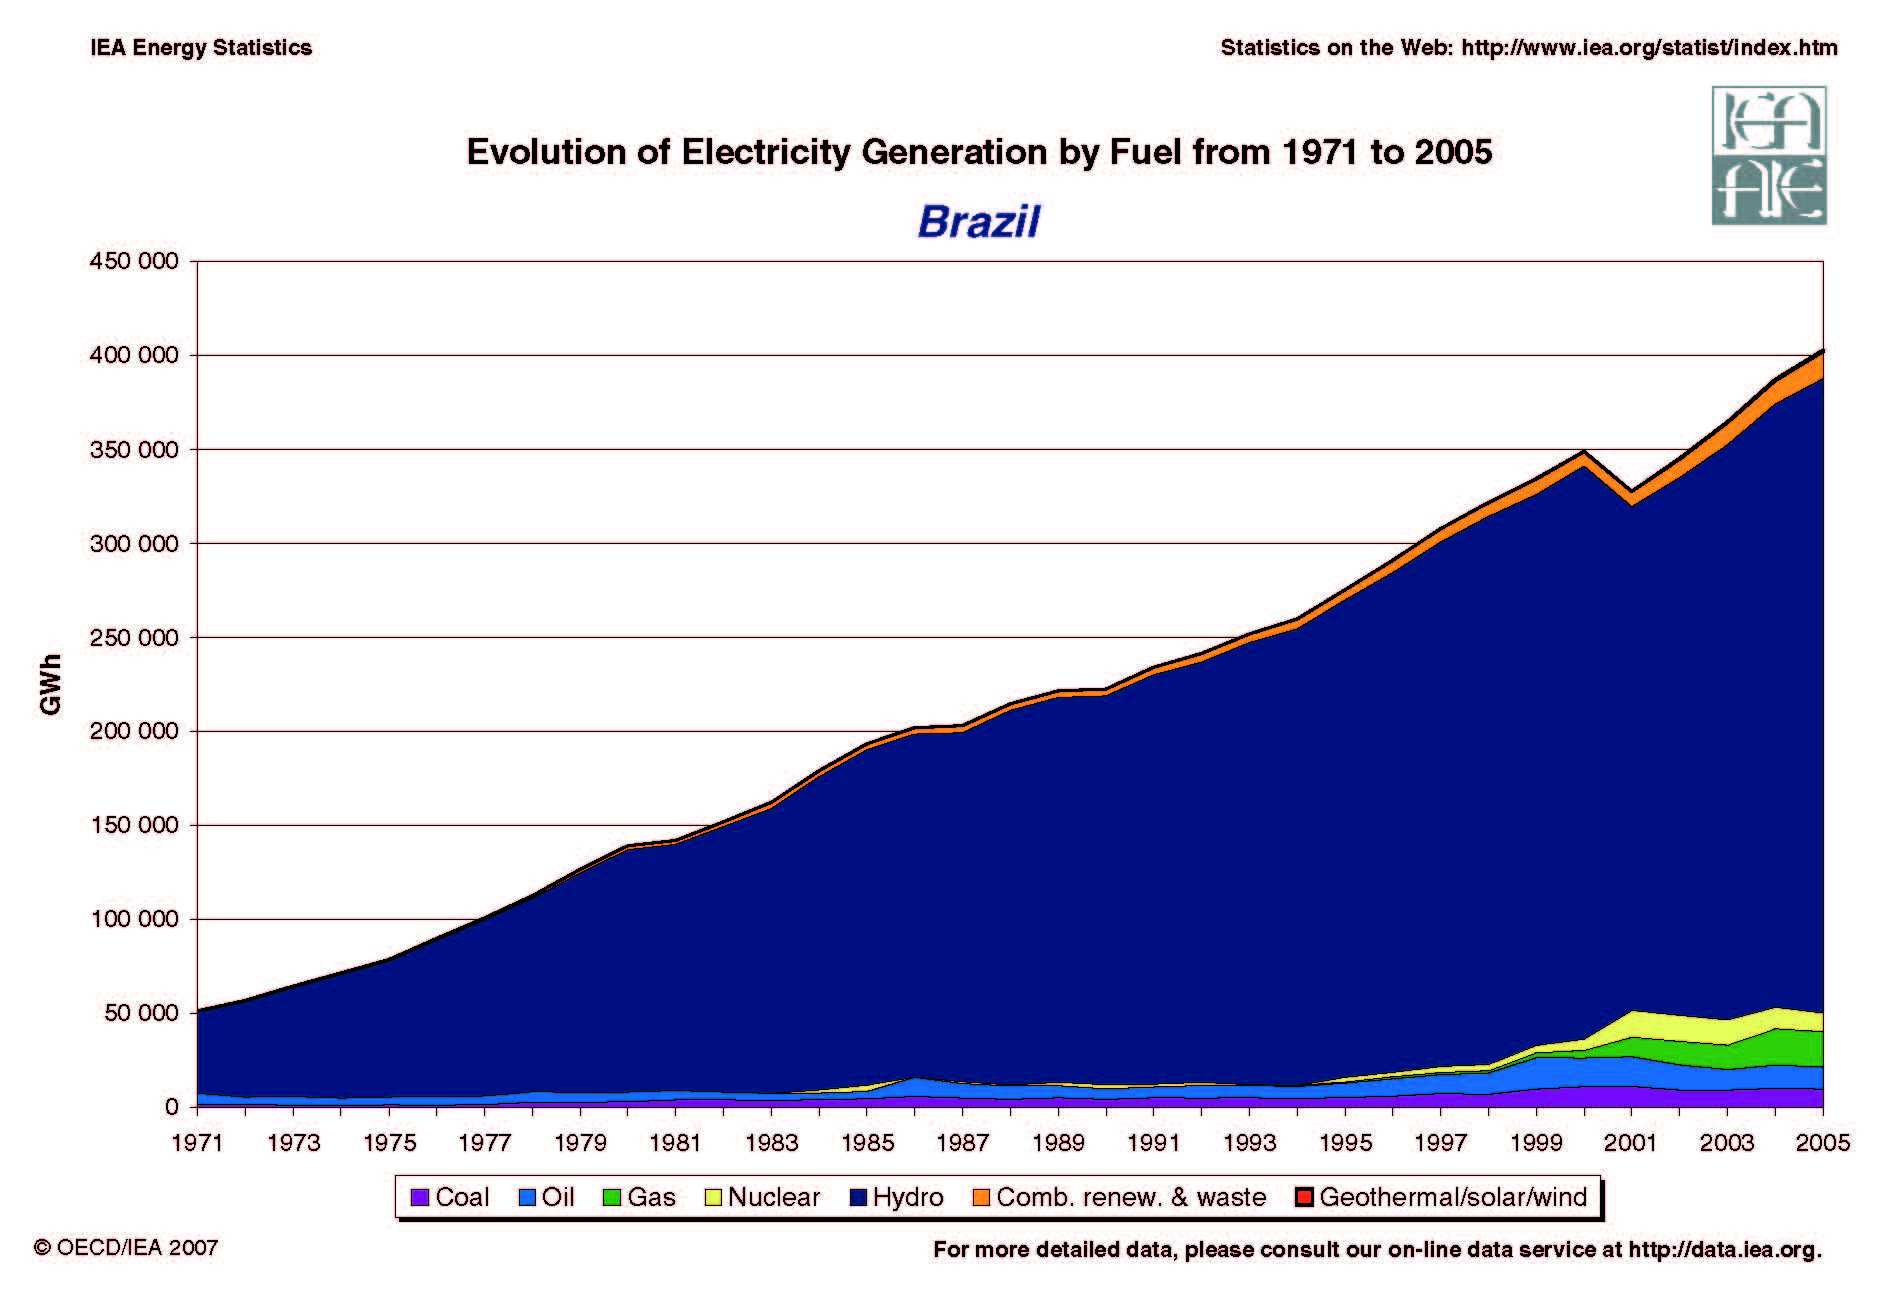 Electricity generation by fuel - Brazil